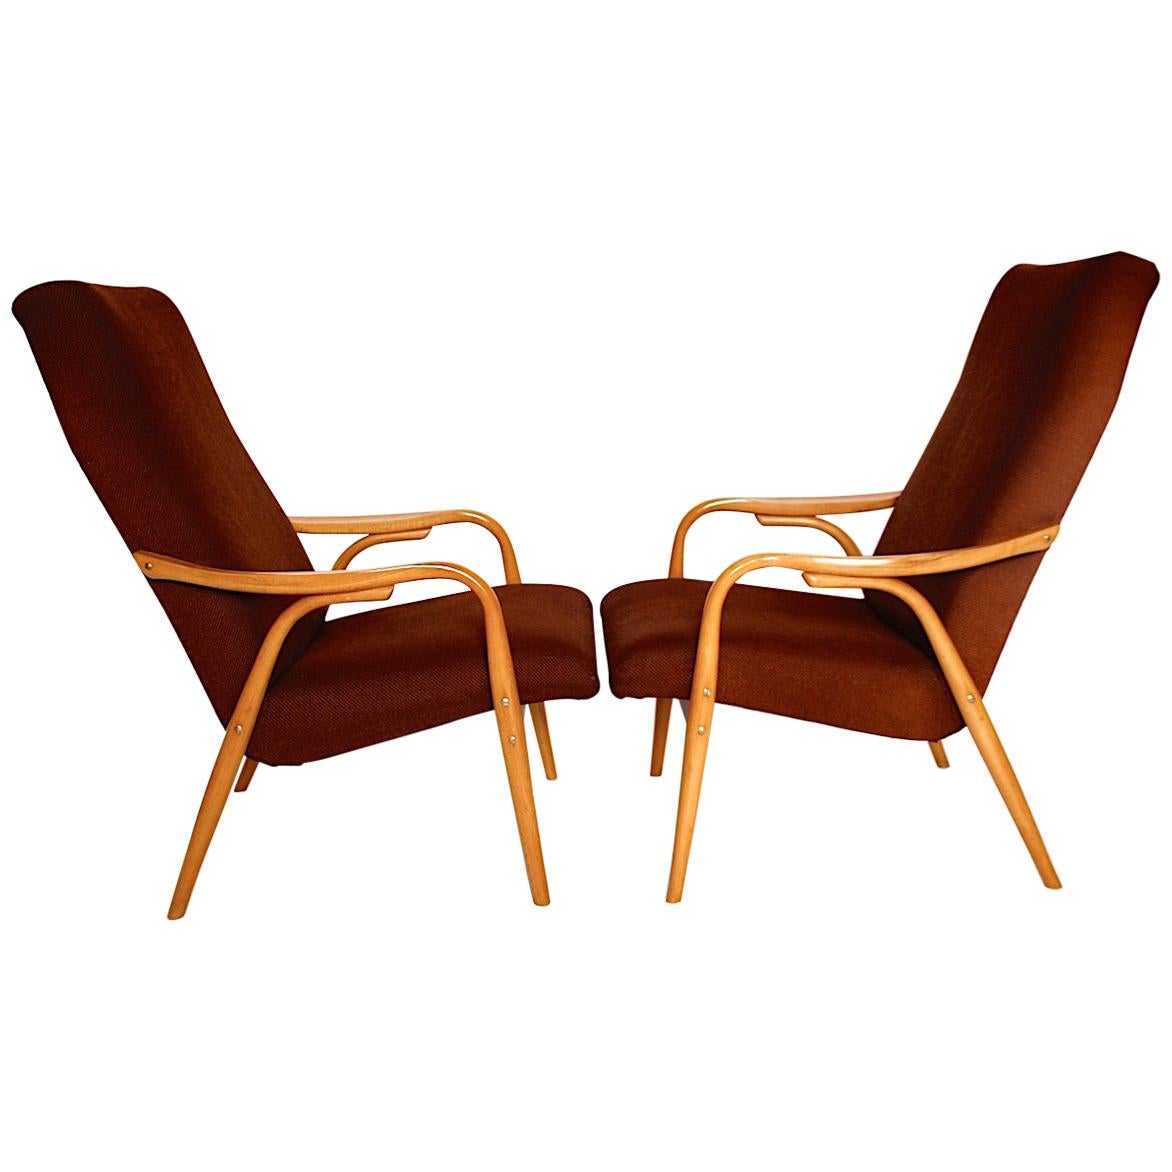 Pair of Retro Armchairs "Ton" For Sale